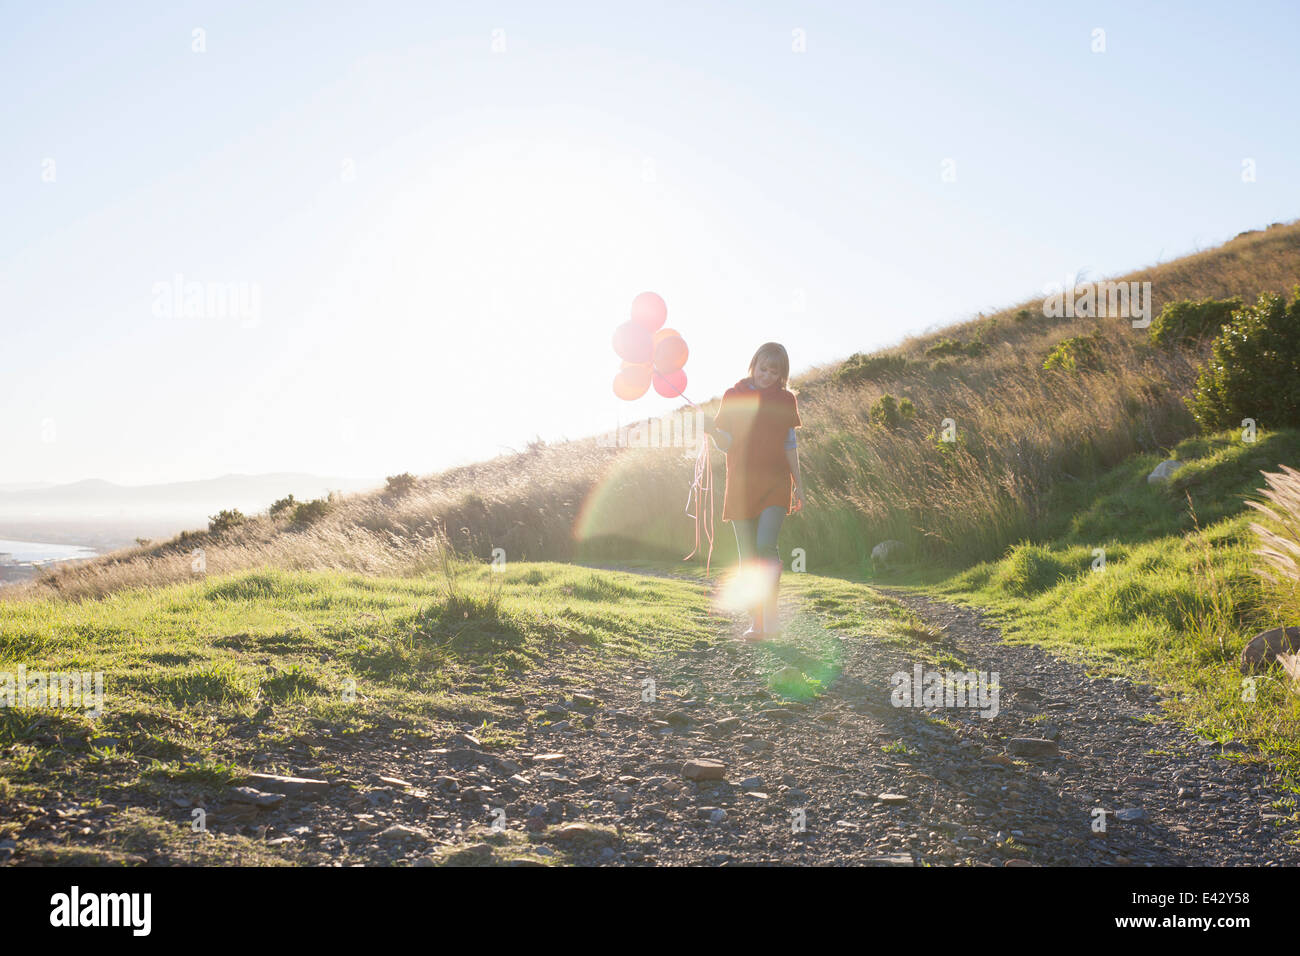 Young woman strolling along dirt track with bunch of balloons Stock Photo